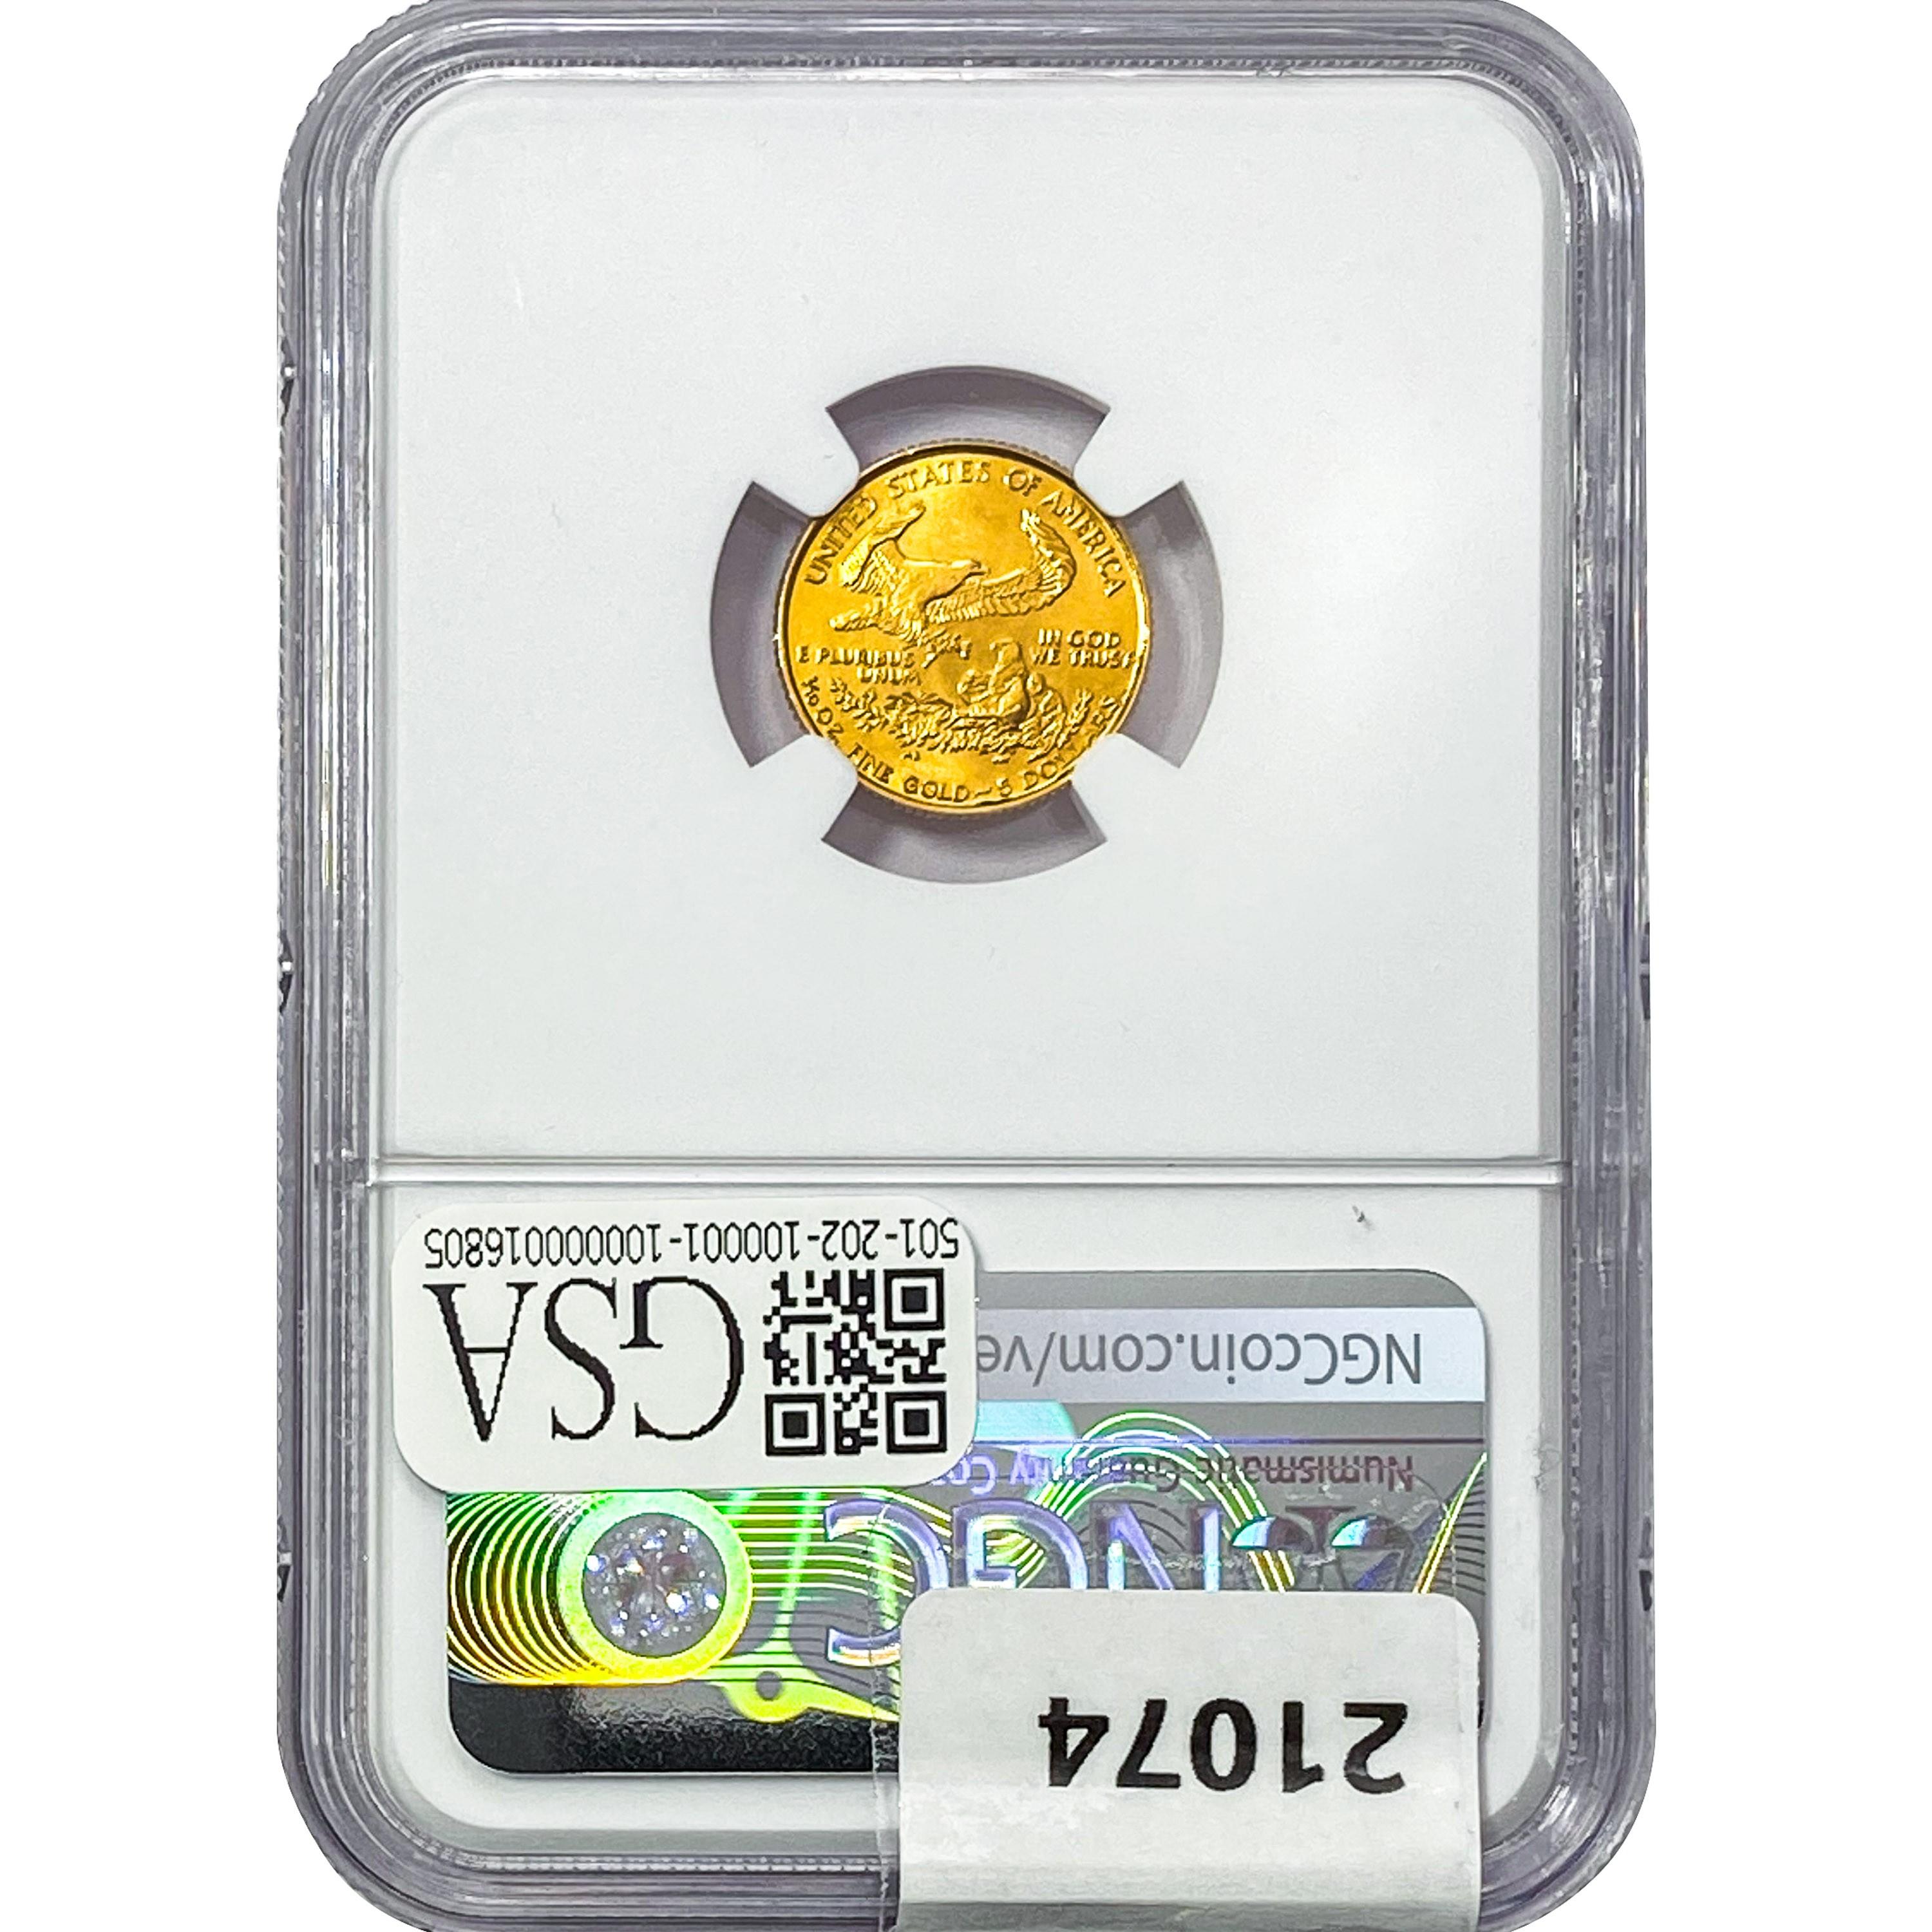 1998 $5 Ty1 A.G.E. REV Signed Frost NGC MS69